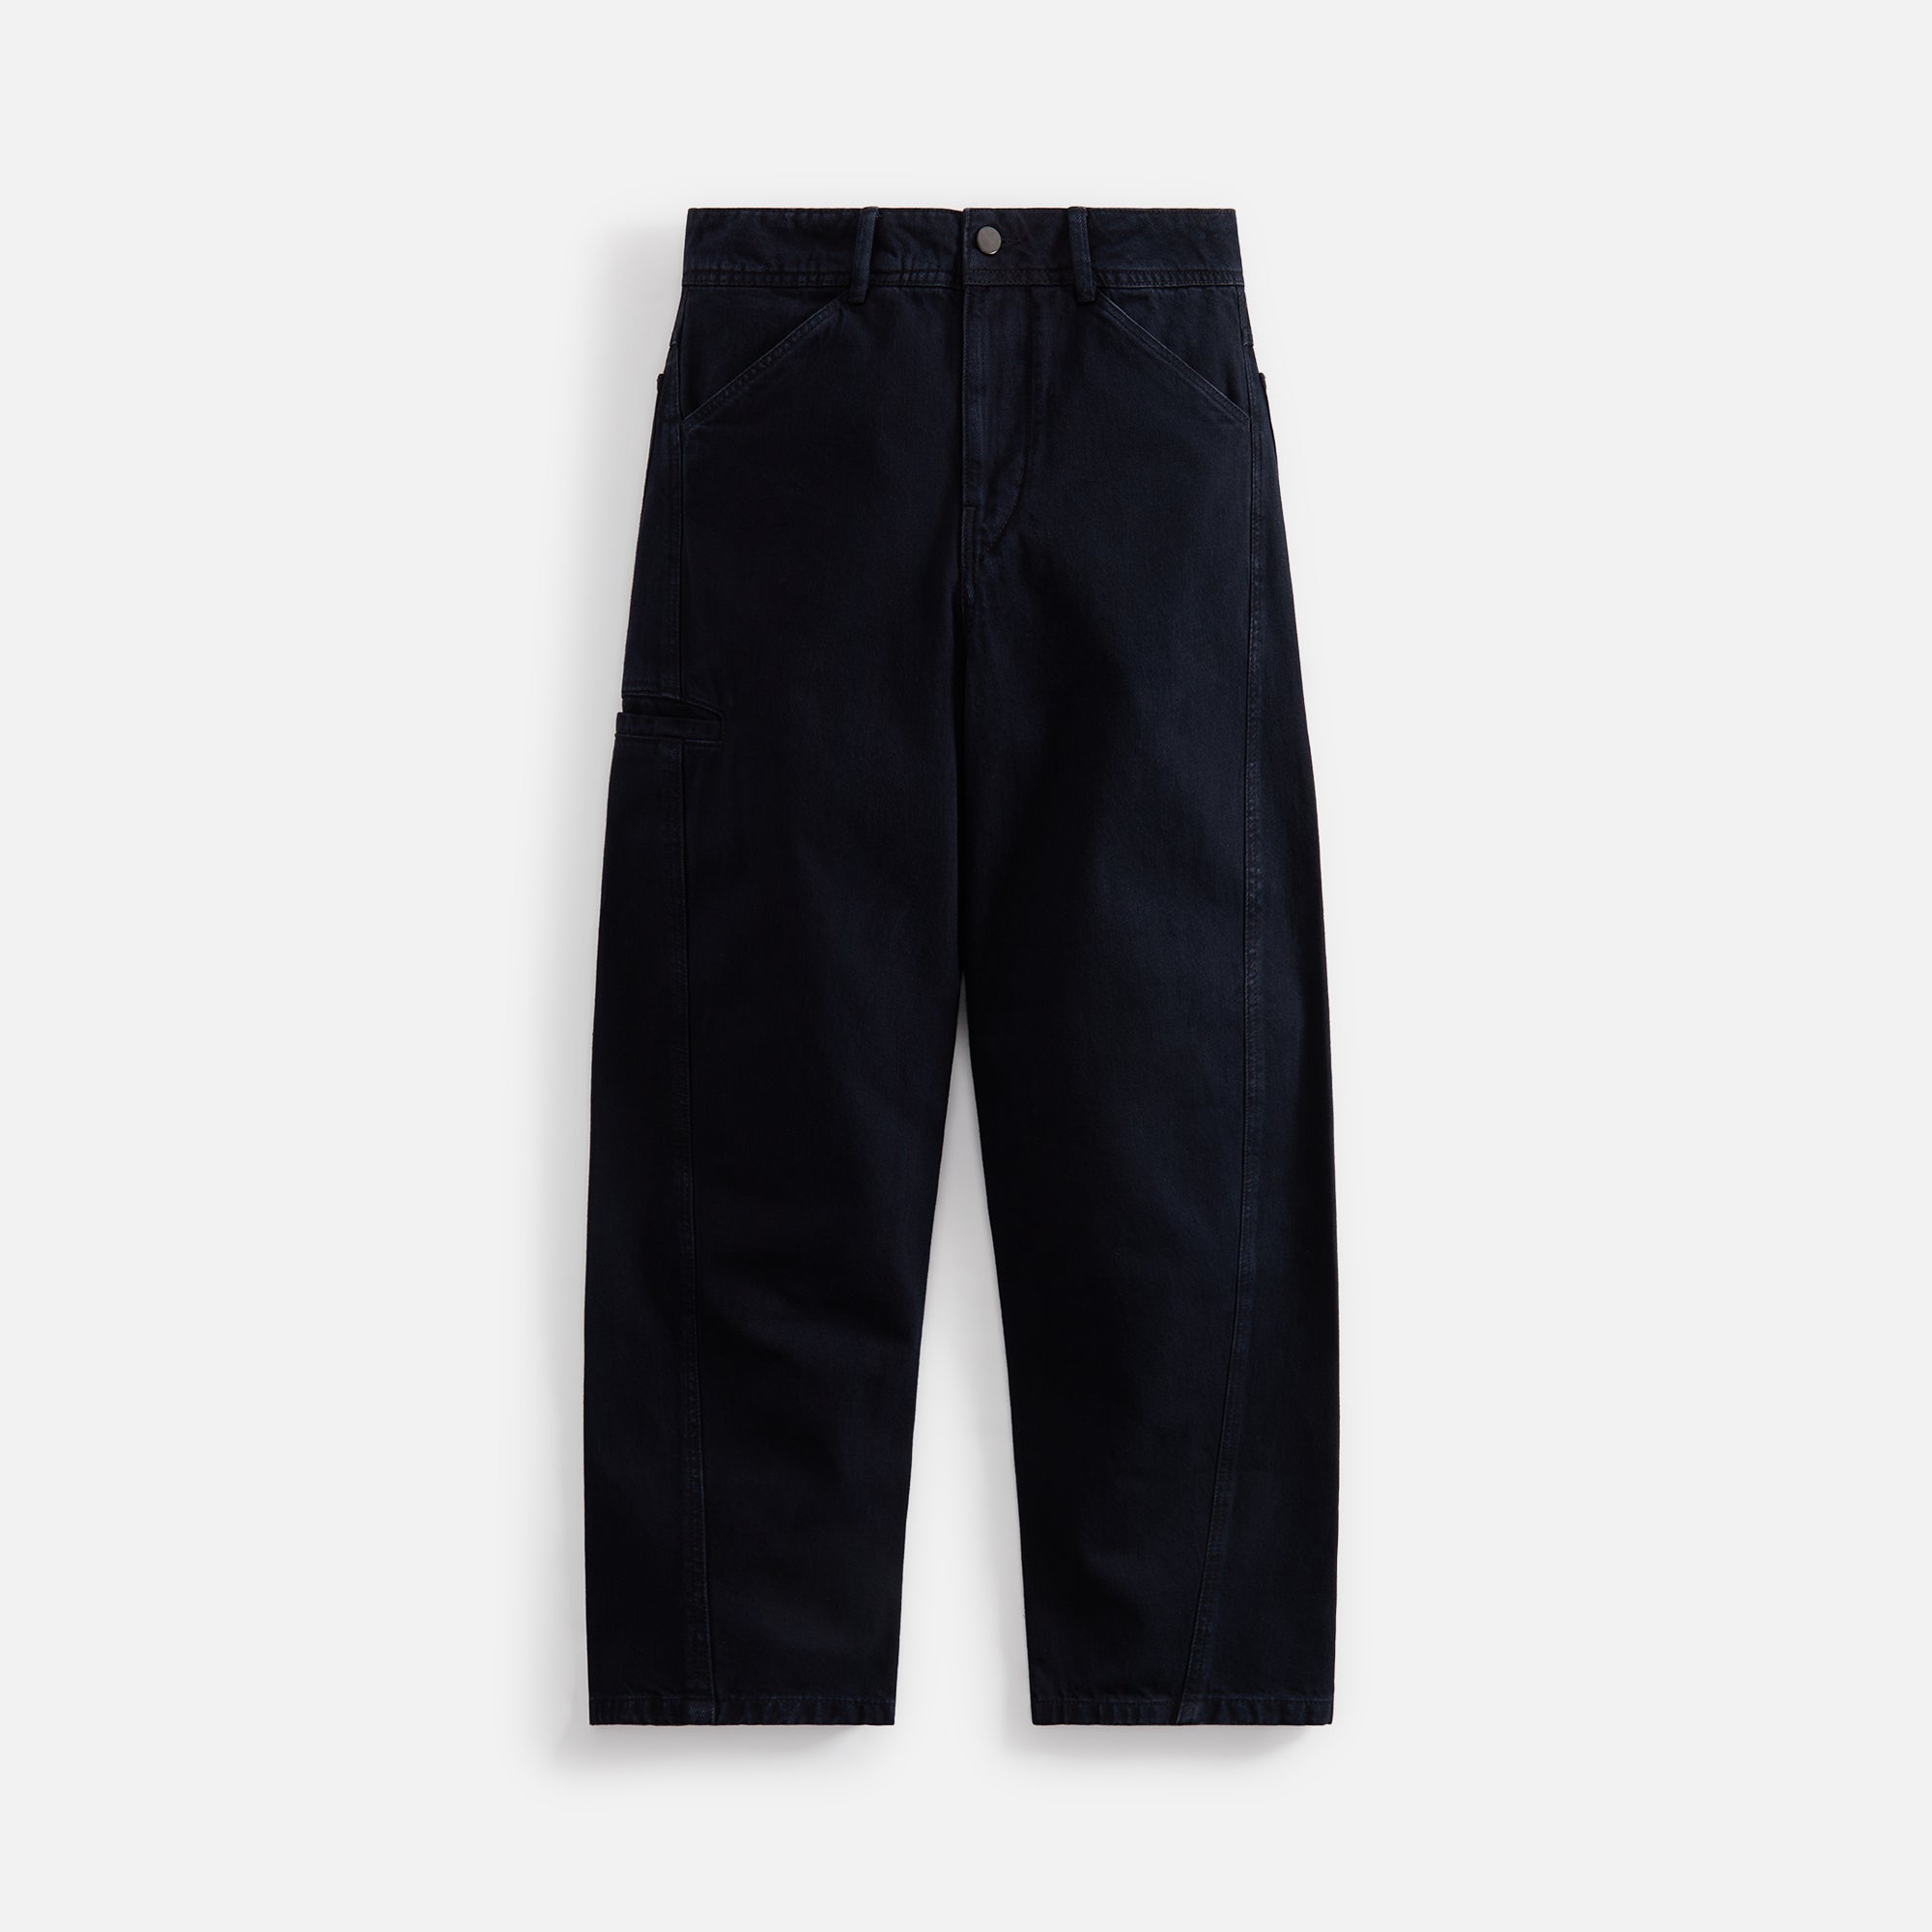 LEMAIRE Indigo Twisted Jeans